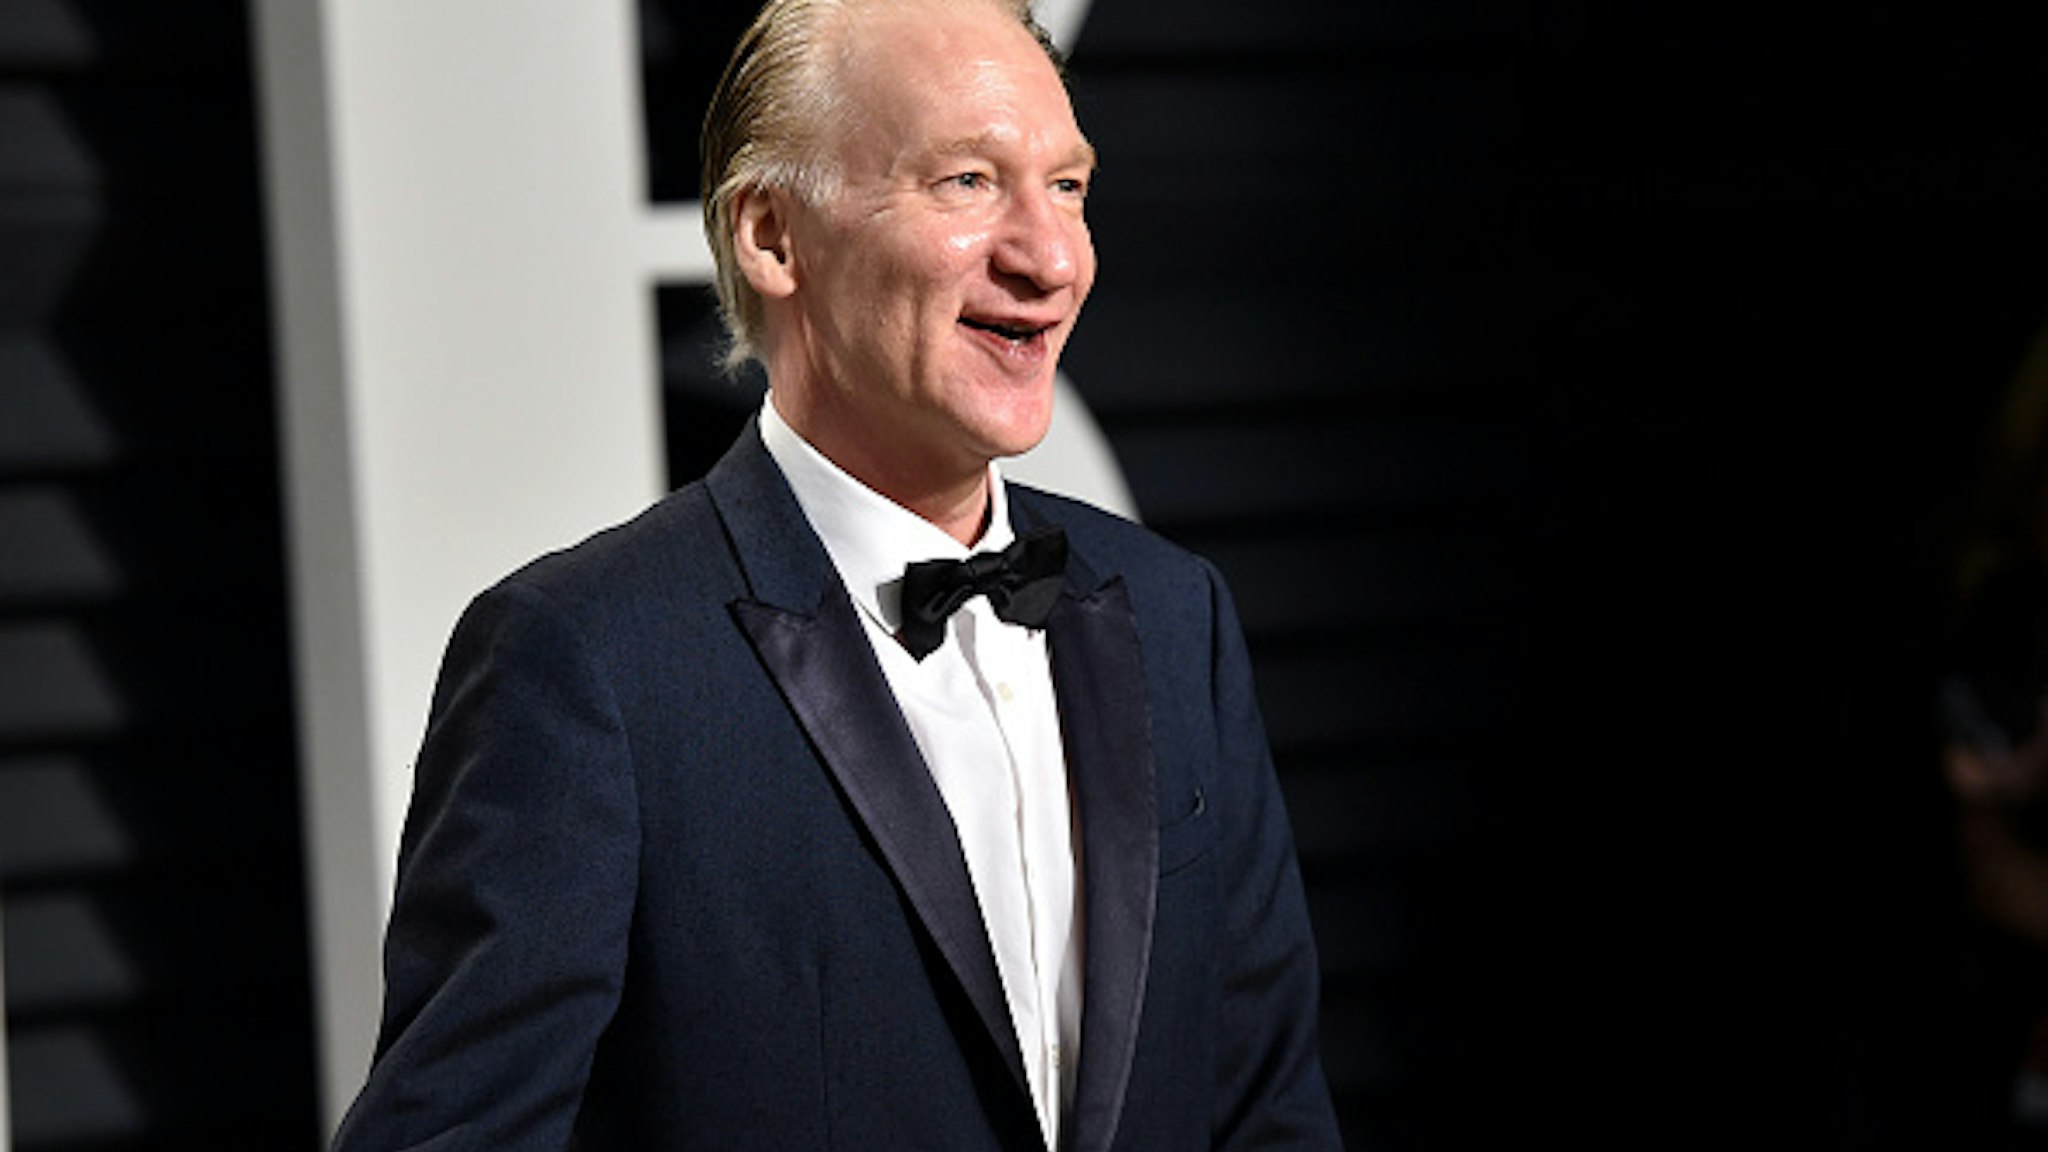 BEVERLY HILLS, CA - FEBRUARY 26: Television personality Bill Maher attends the 2017 Vanity Fair Oscar Party hosted by Graydon Carter at Wallis Annenberg Center for the Performing Arts on February 26, 2017 in Beverly Hills, California.